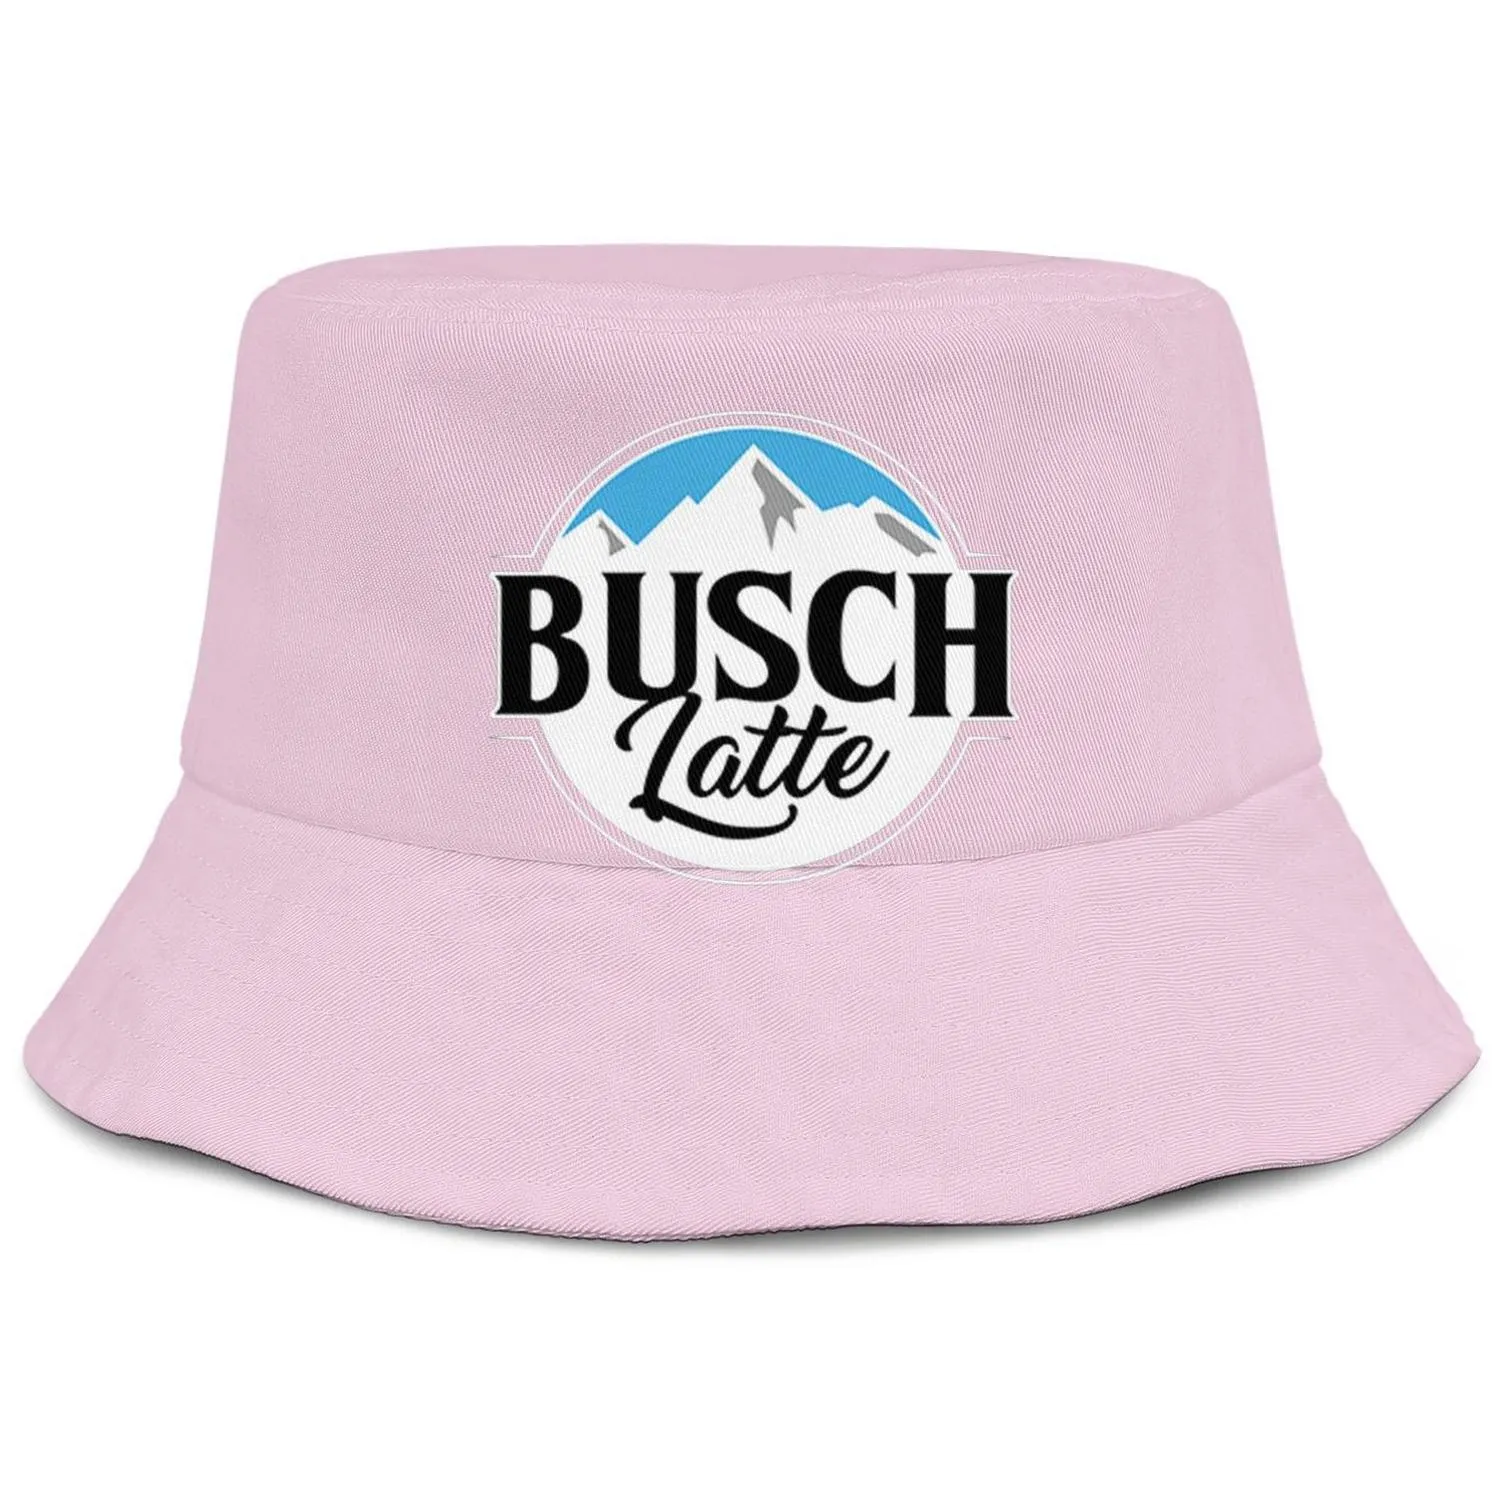 Busch Light Beer logo mens and womens buckethat cool youth bucket baseballcap light blue adge white Latte So Much4688109